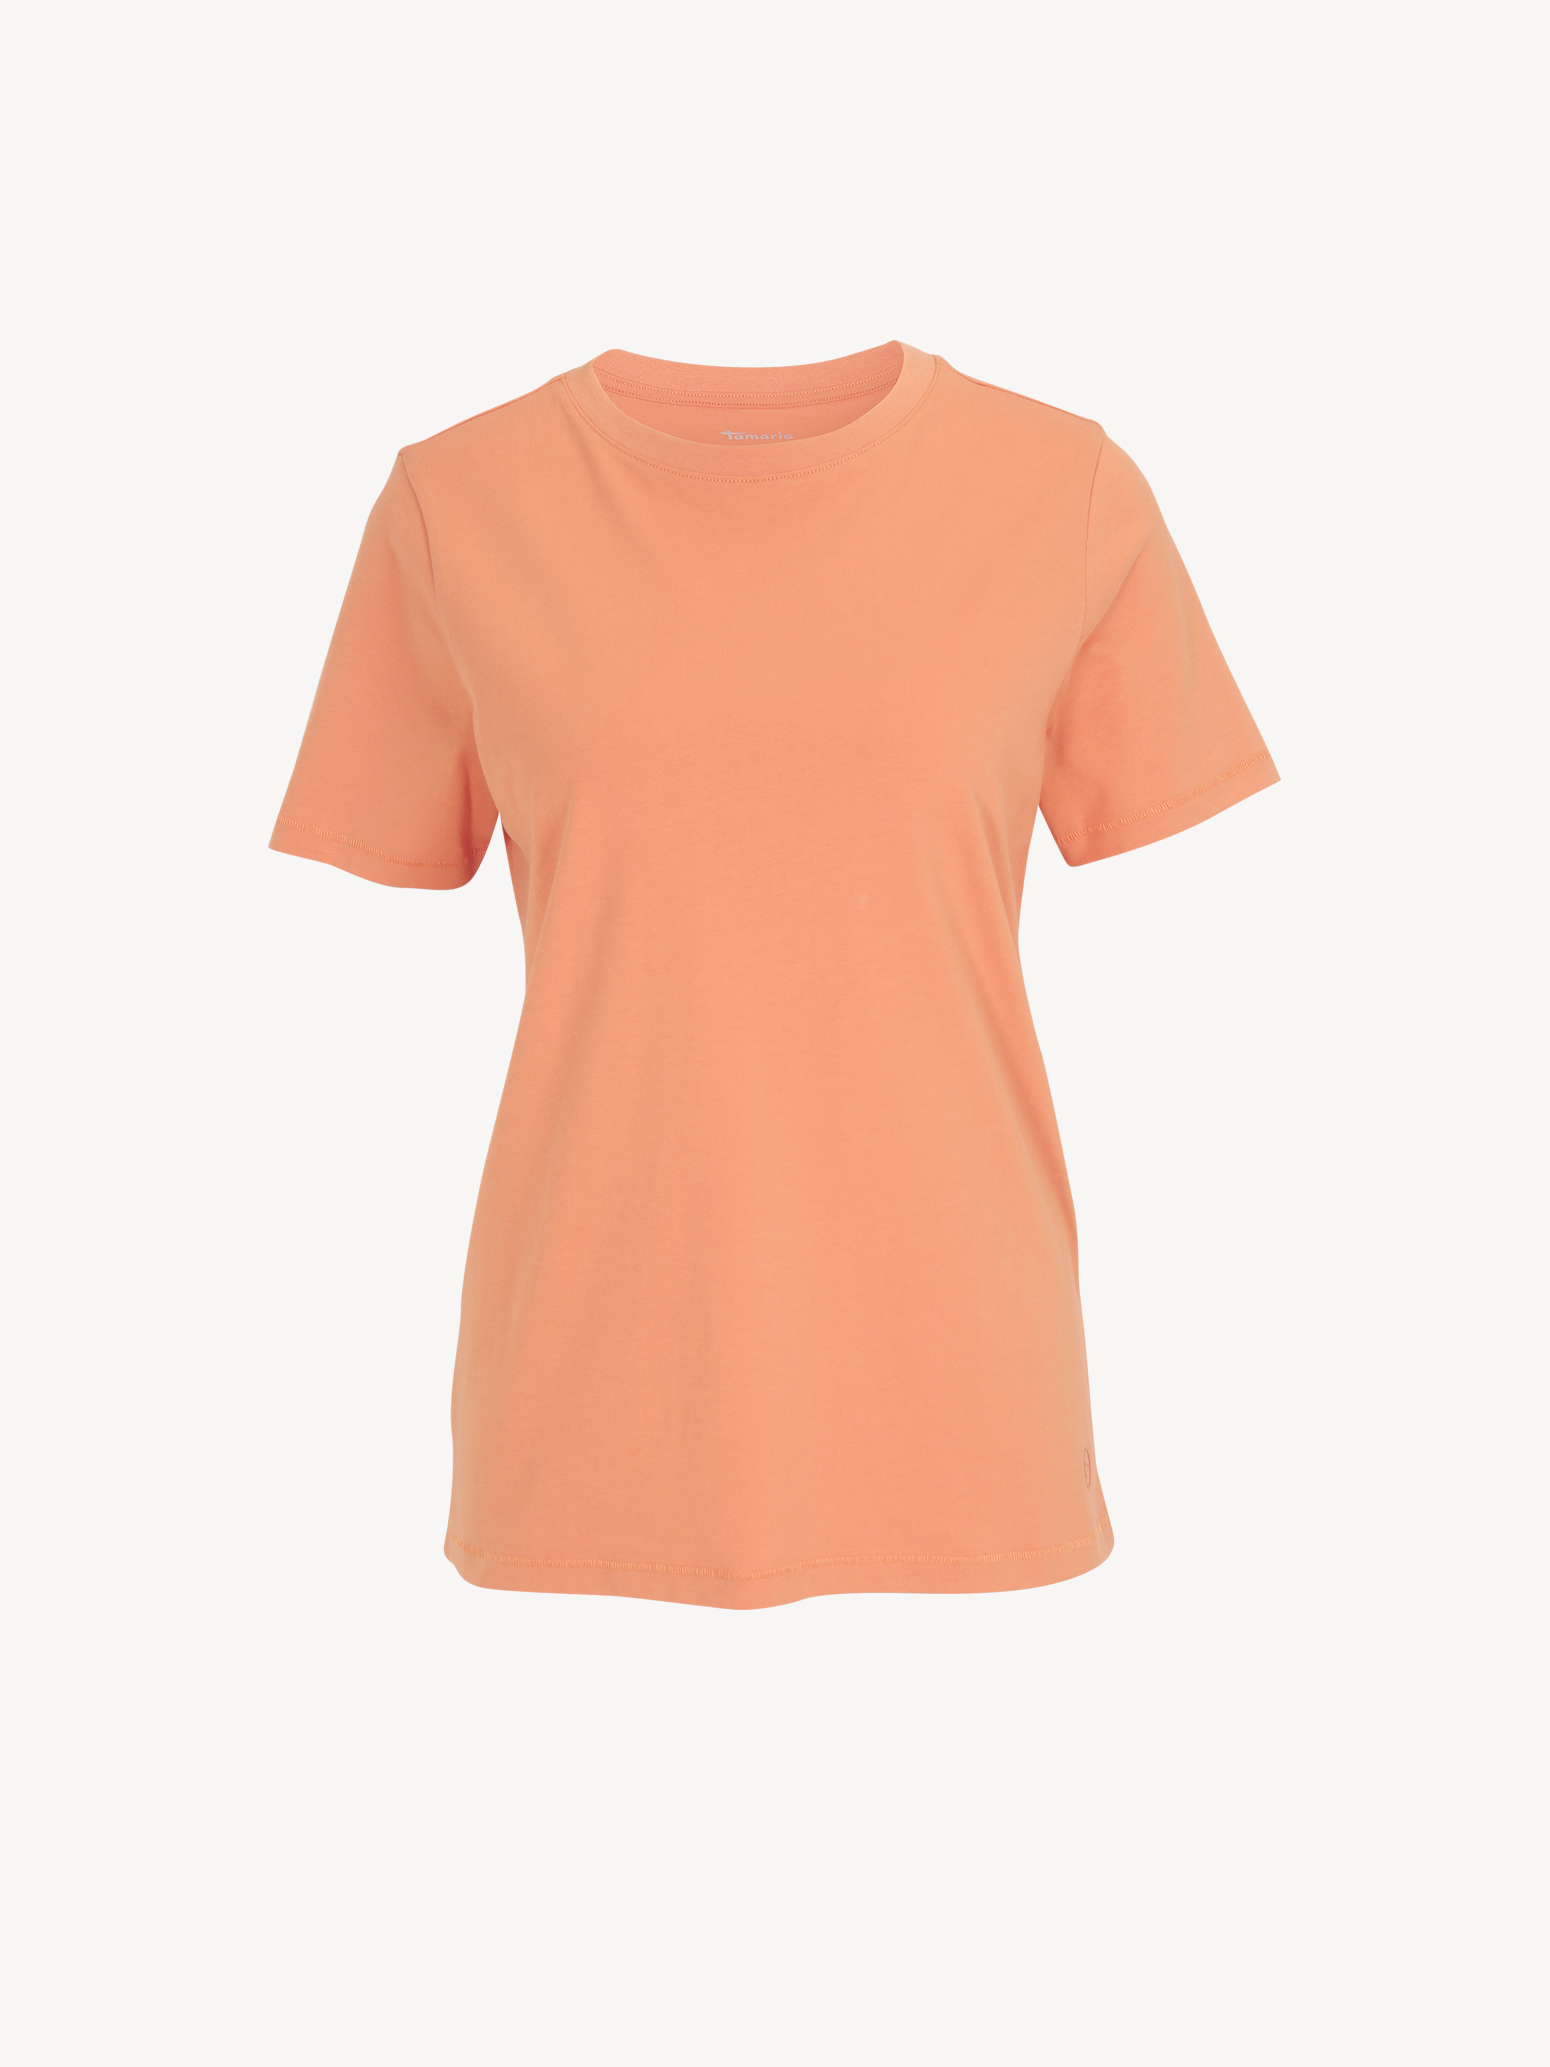 Tamaris Shirts & Tops: Discover bargains and offers in the Tamaris shop now!